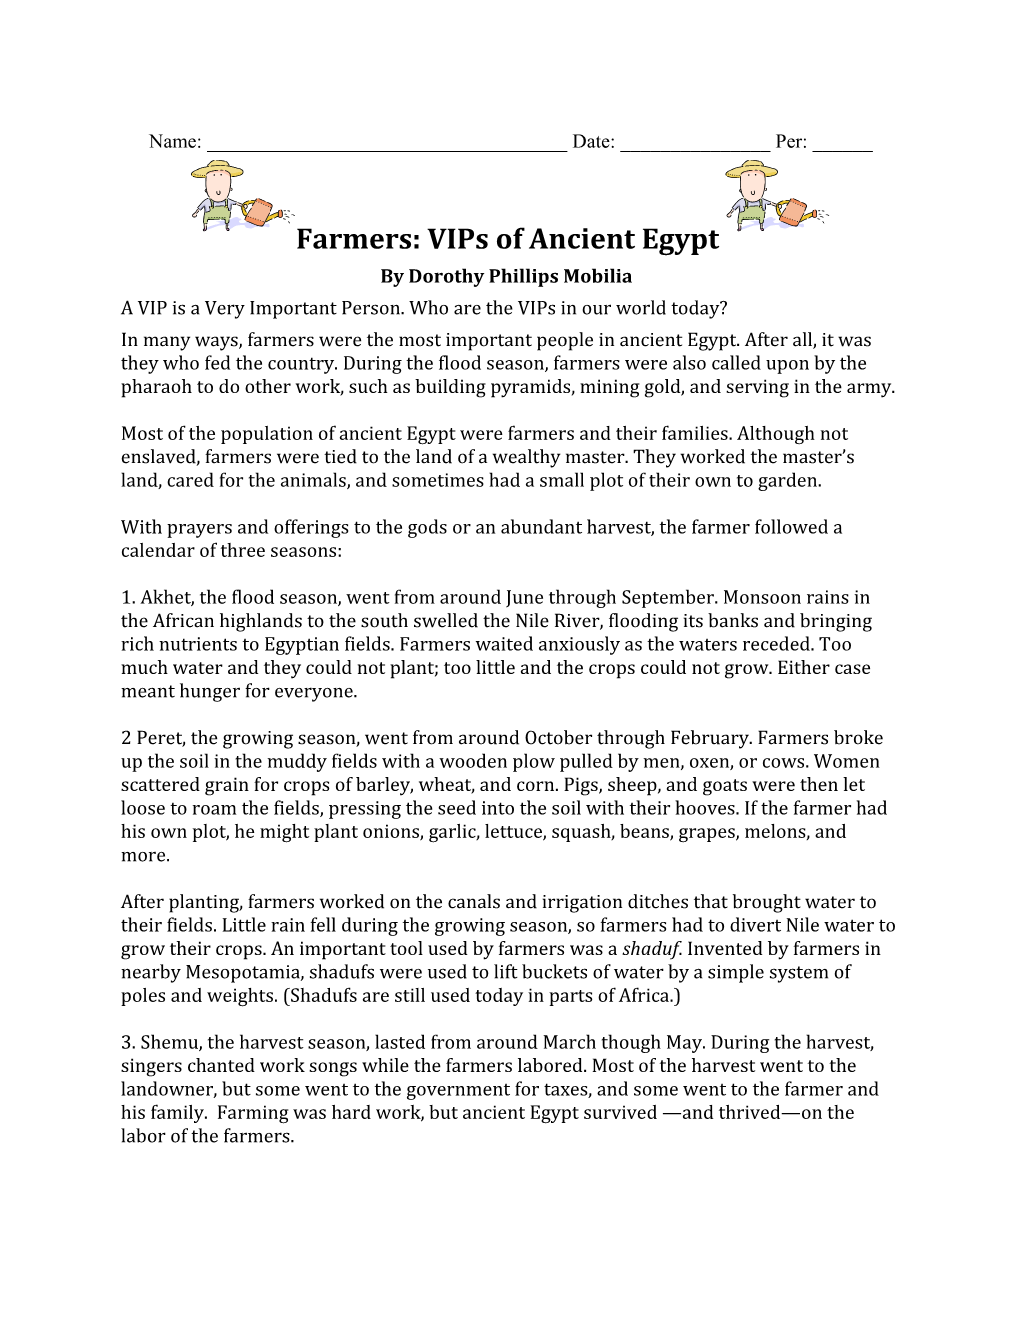 Farmers: Vips of Ancient Egypt